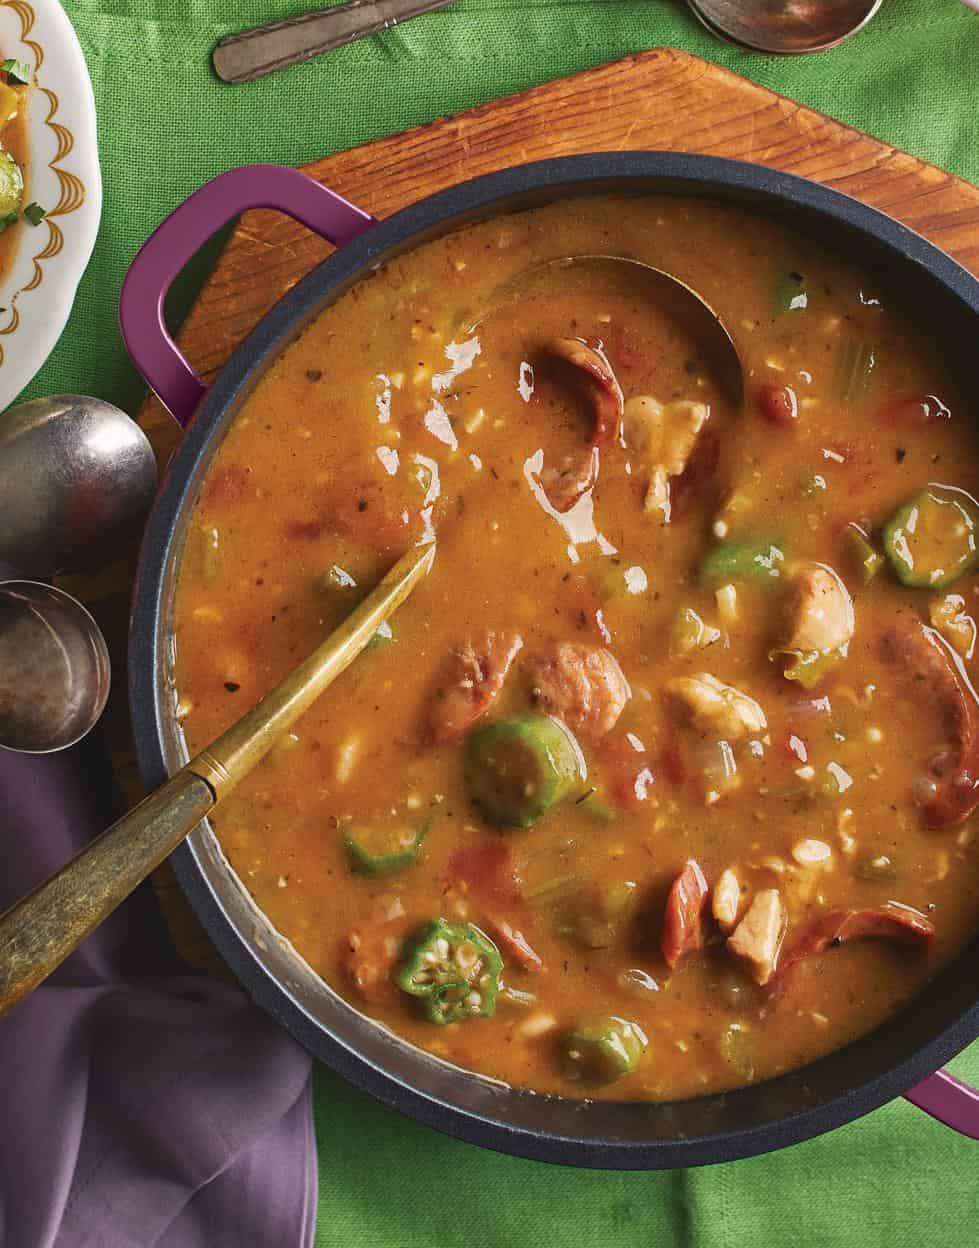  Don't be afraid to get your hands dirty with this Louisiana classic.